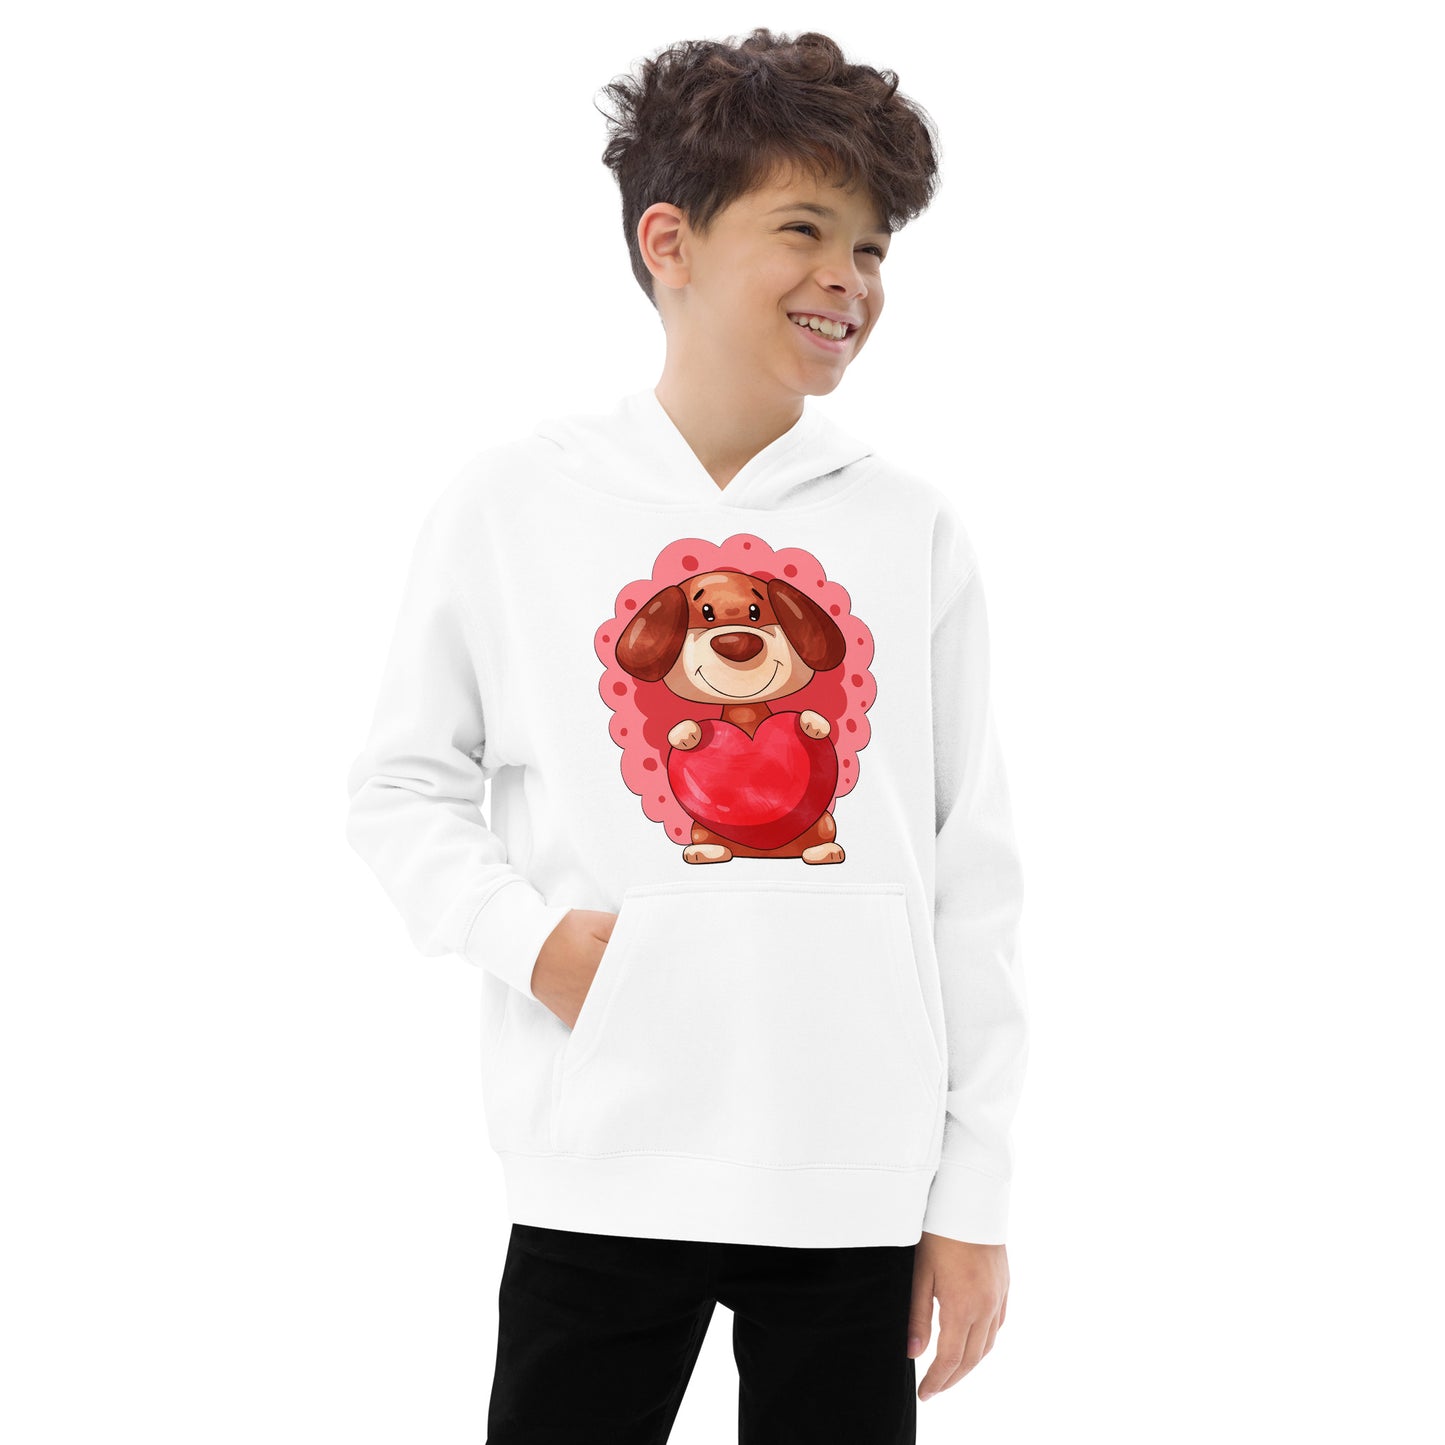 Dog Puppy with Heart Hoodie, No. 0393